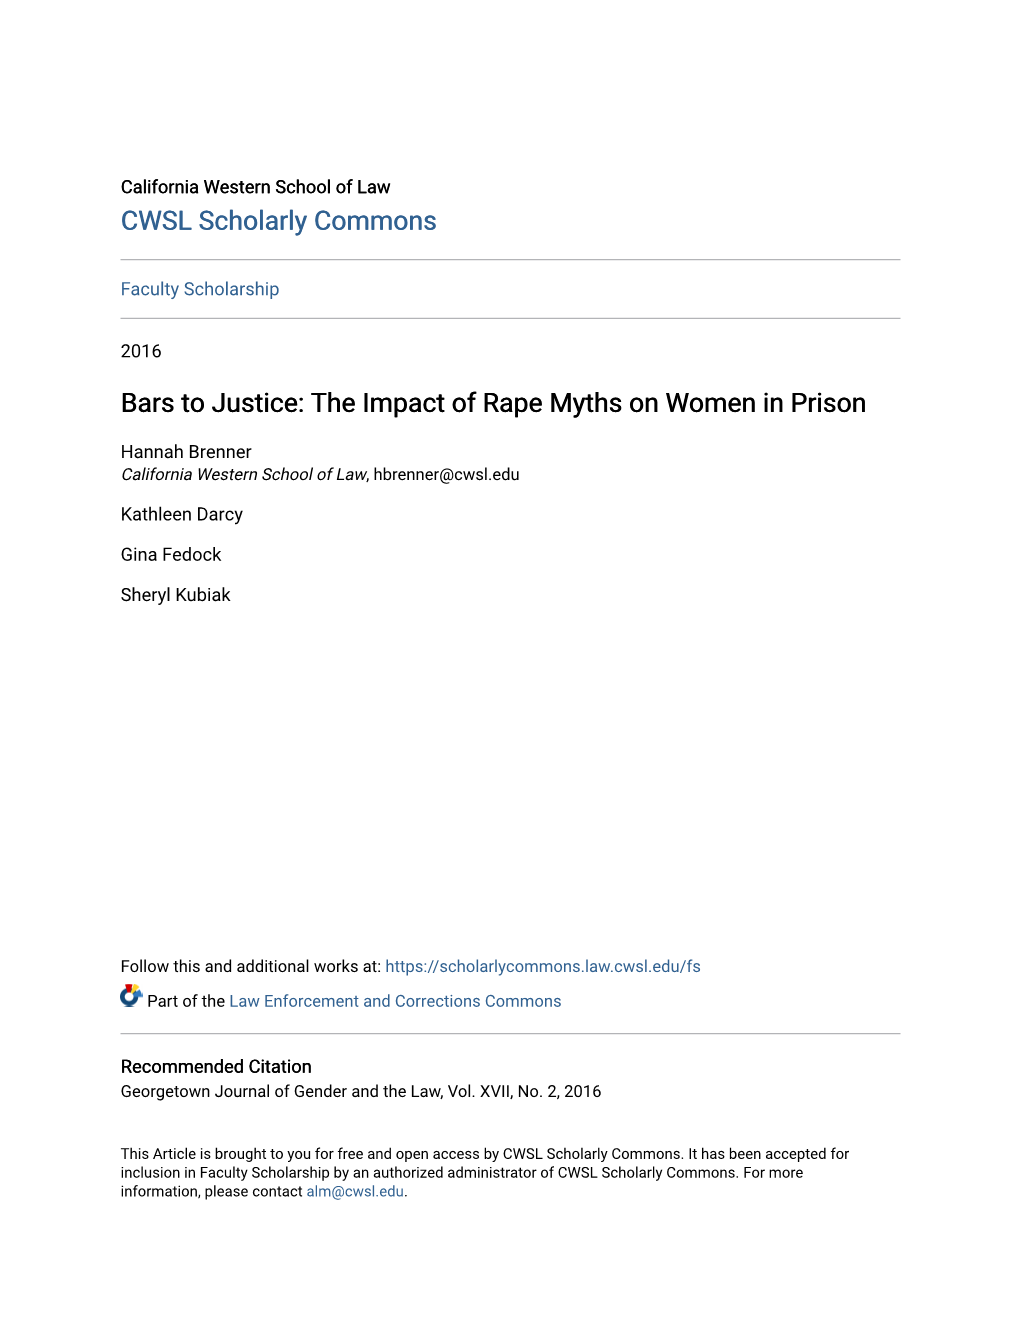 Bars to Justice: the Impact of Rape Myths on Women in Prison